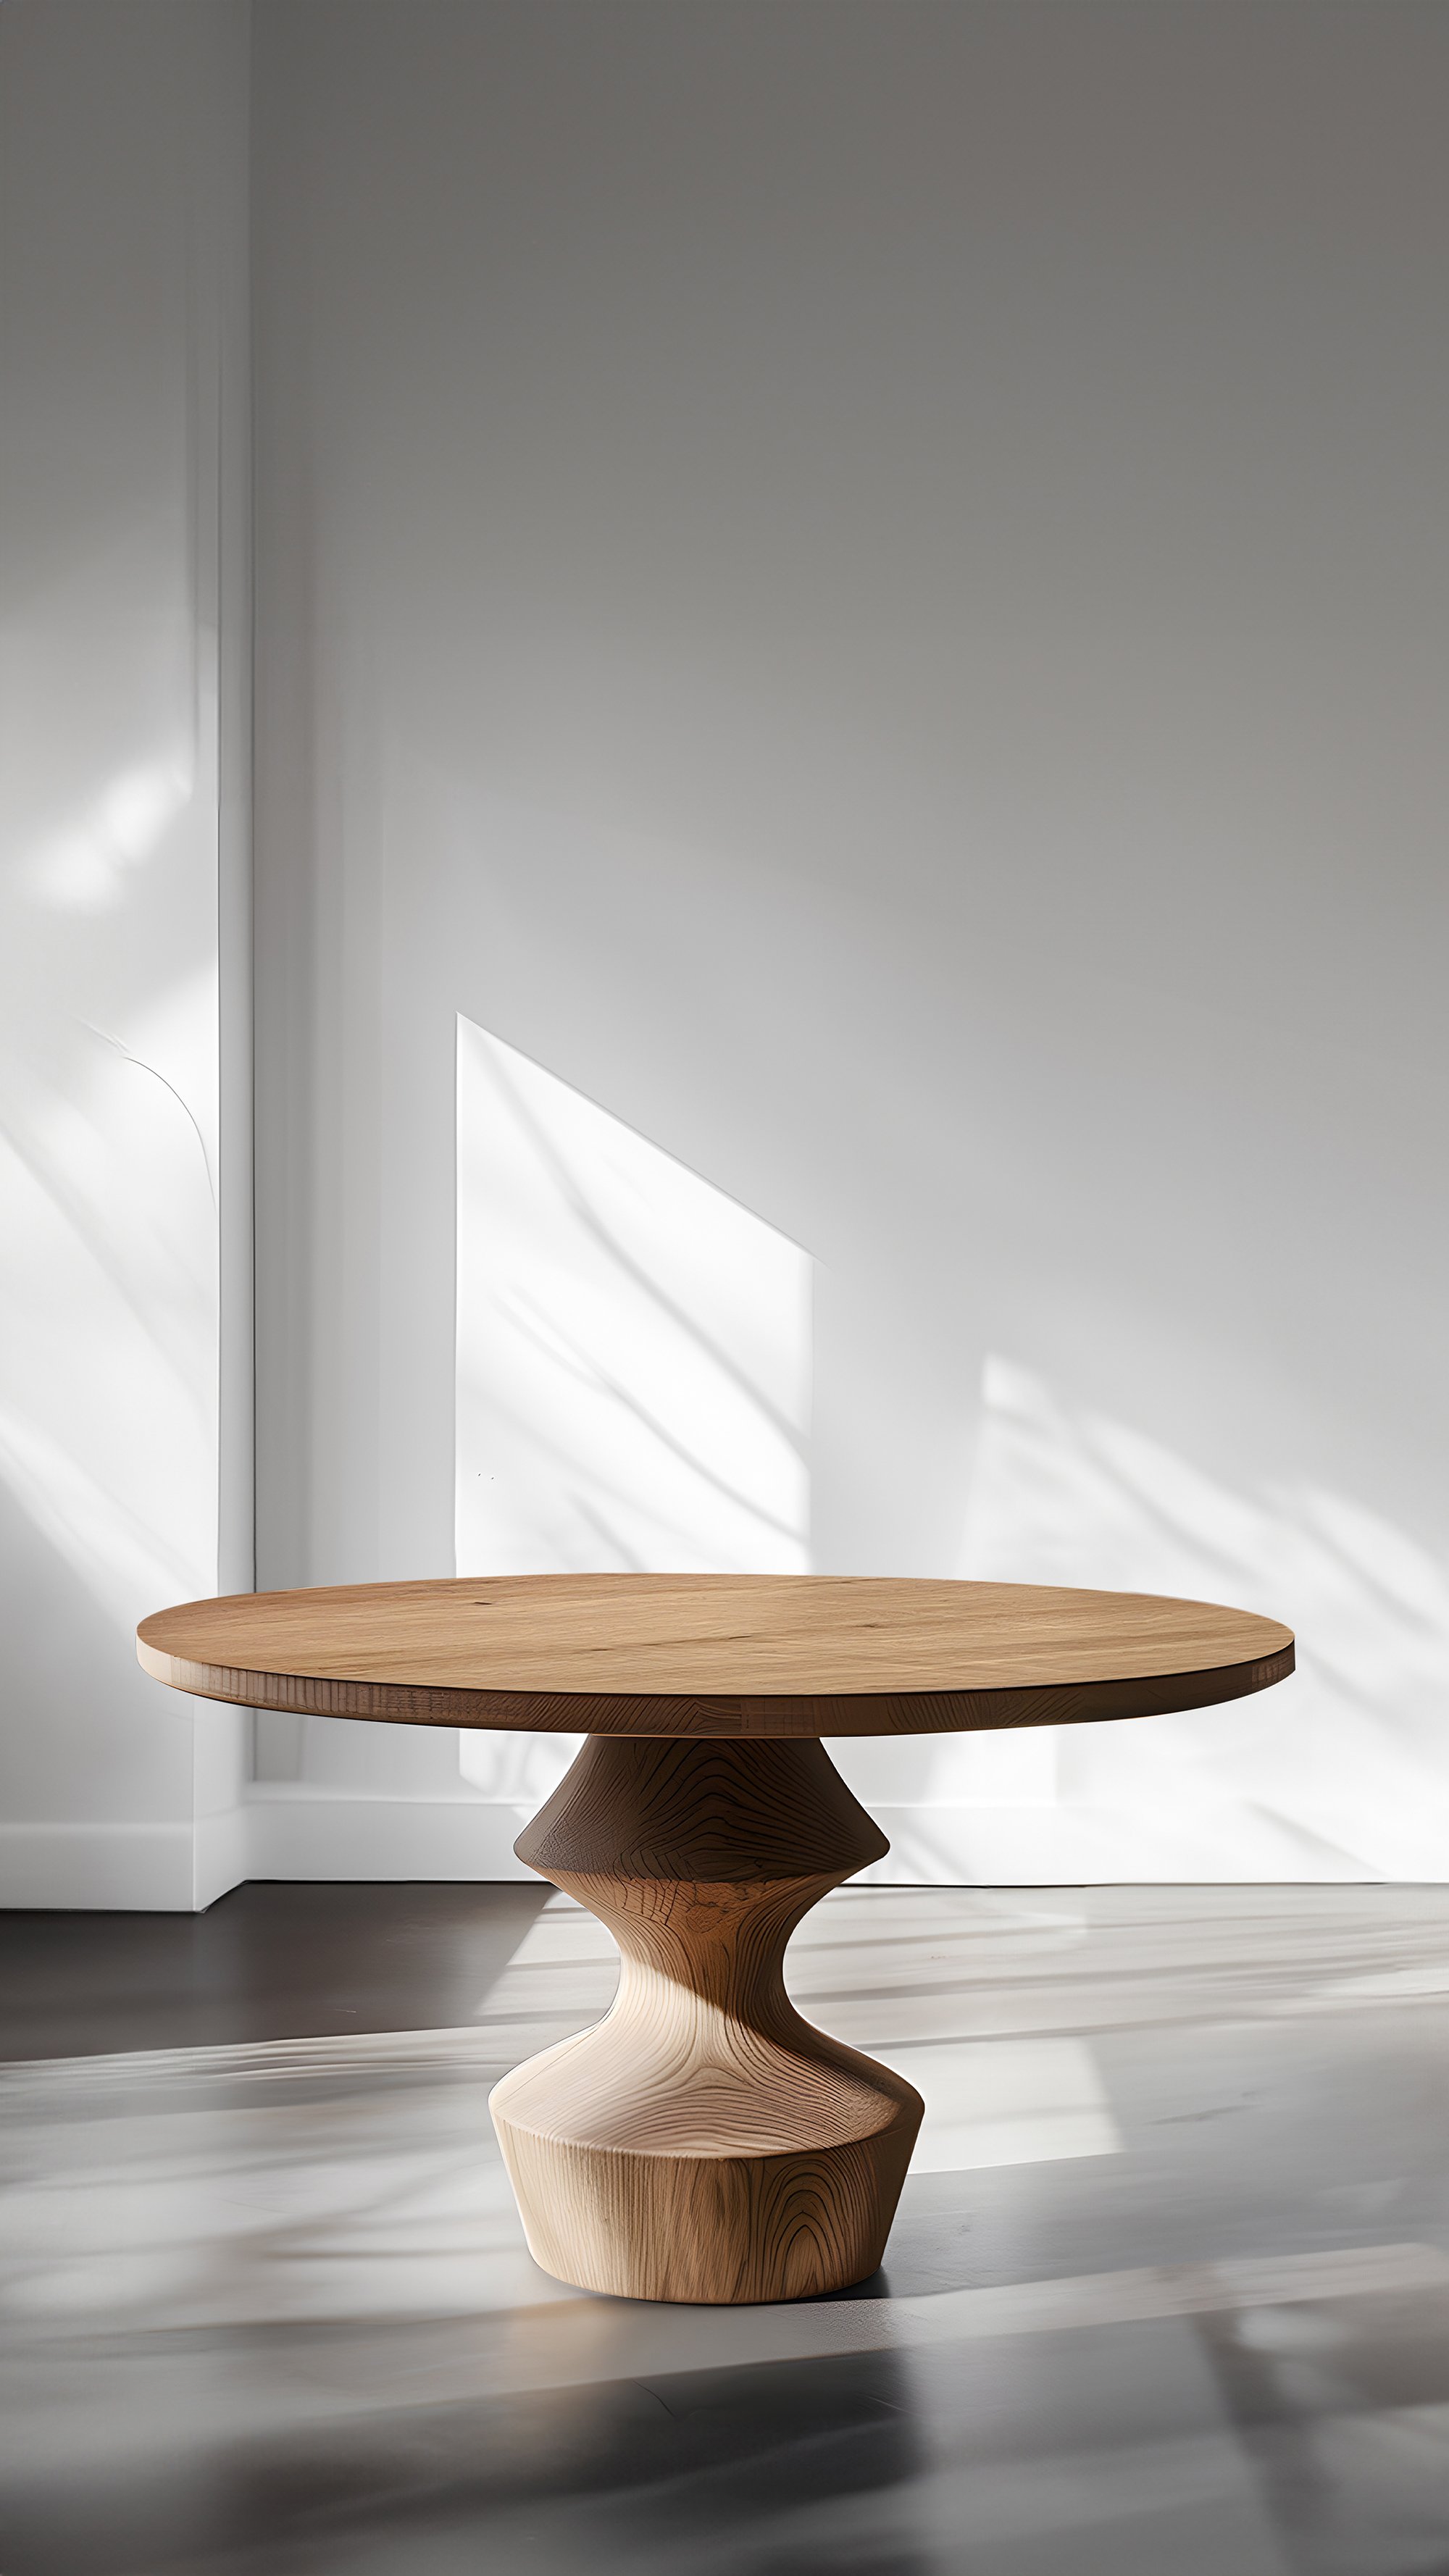 Socle Dessert Tables No11, Sweet Design in Solid Wood by NONO - 7.jpg